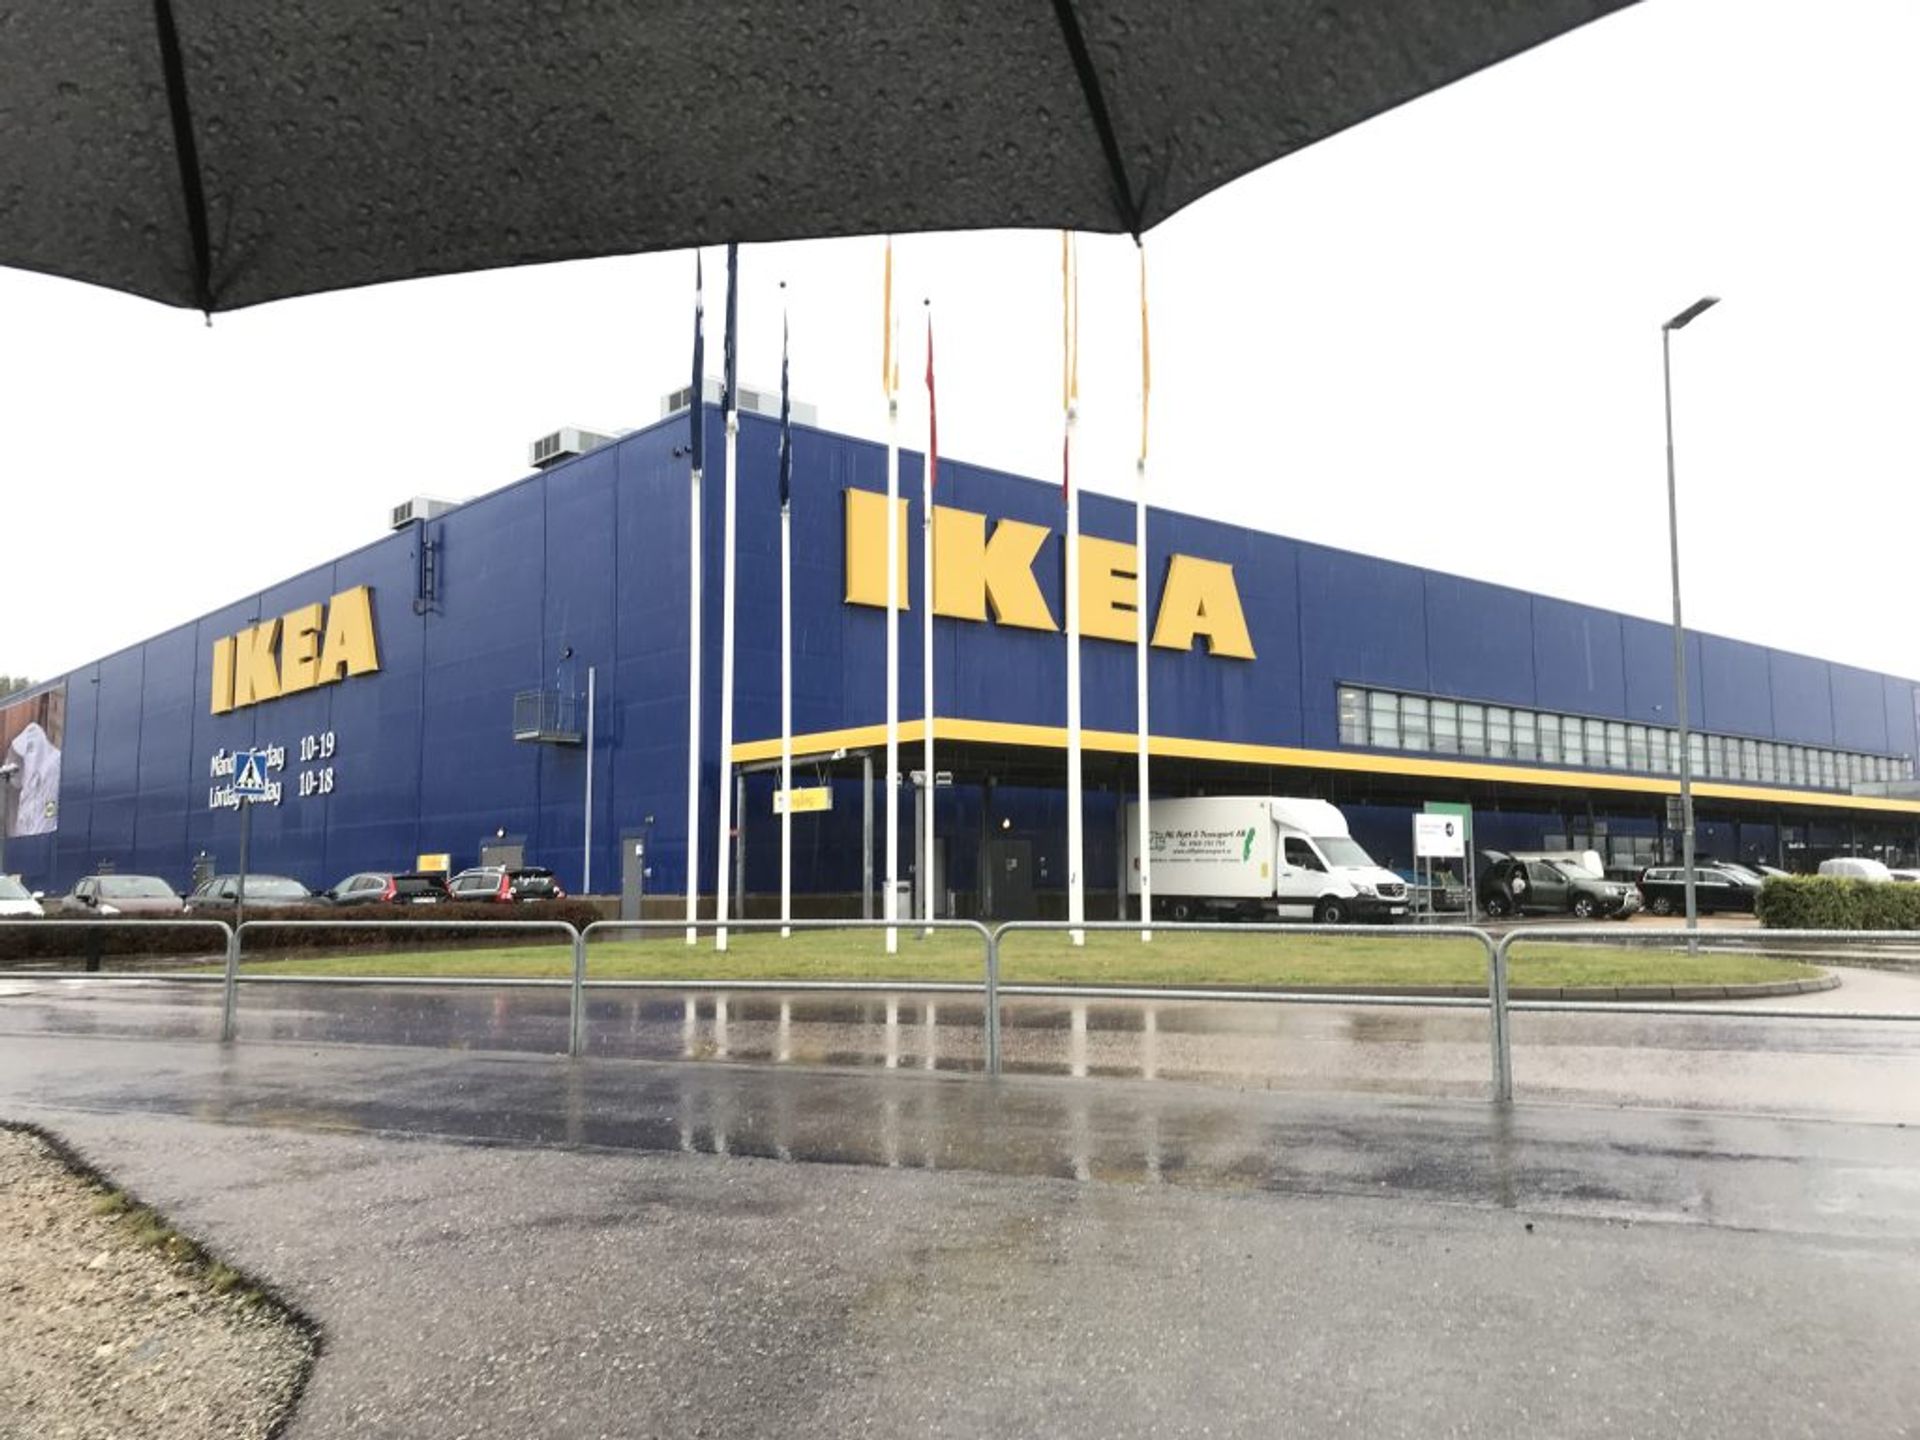 A picture of IKEA store in Uddevalla on a rainy day